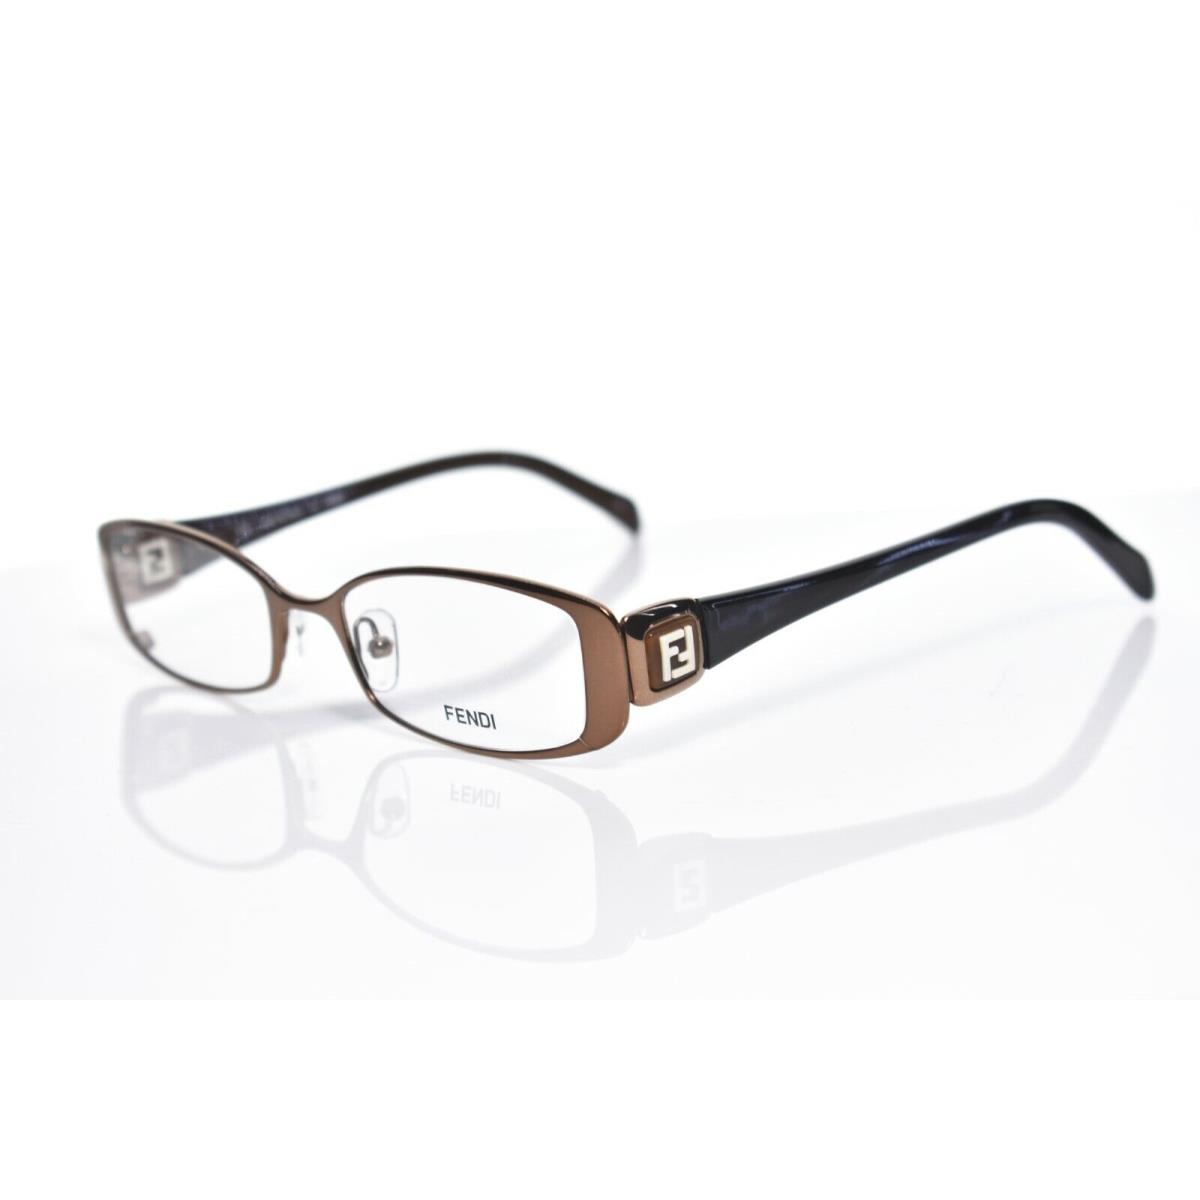 Fendi 901 209 Eyeglasses with Replaced Nose Pads 50-18-135